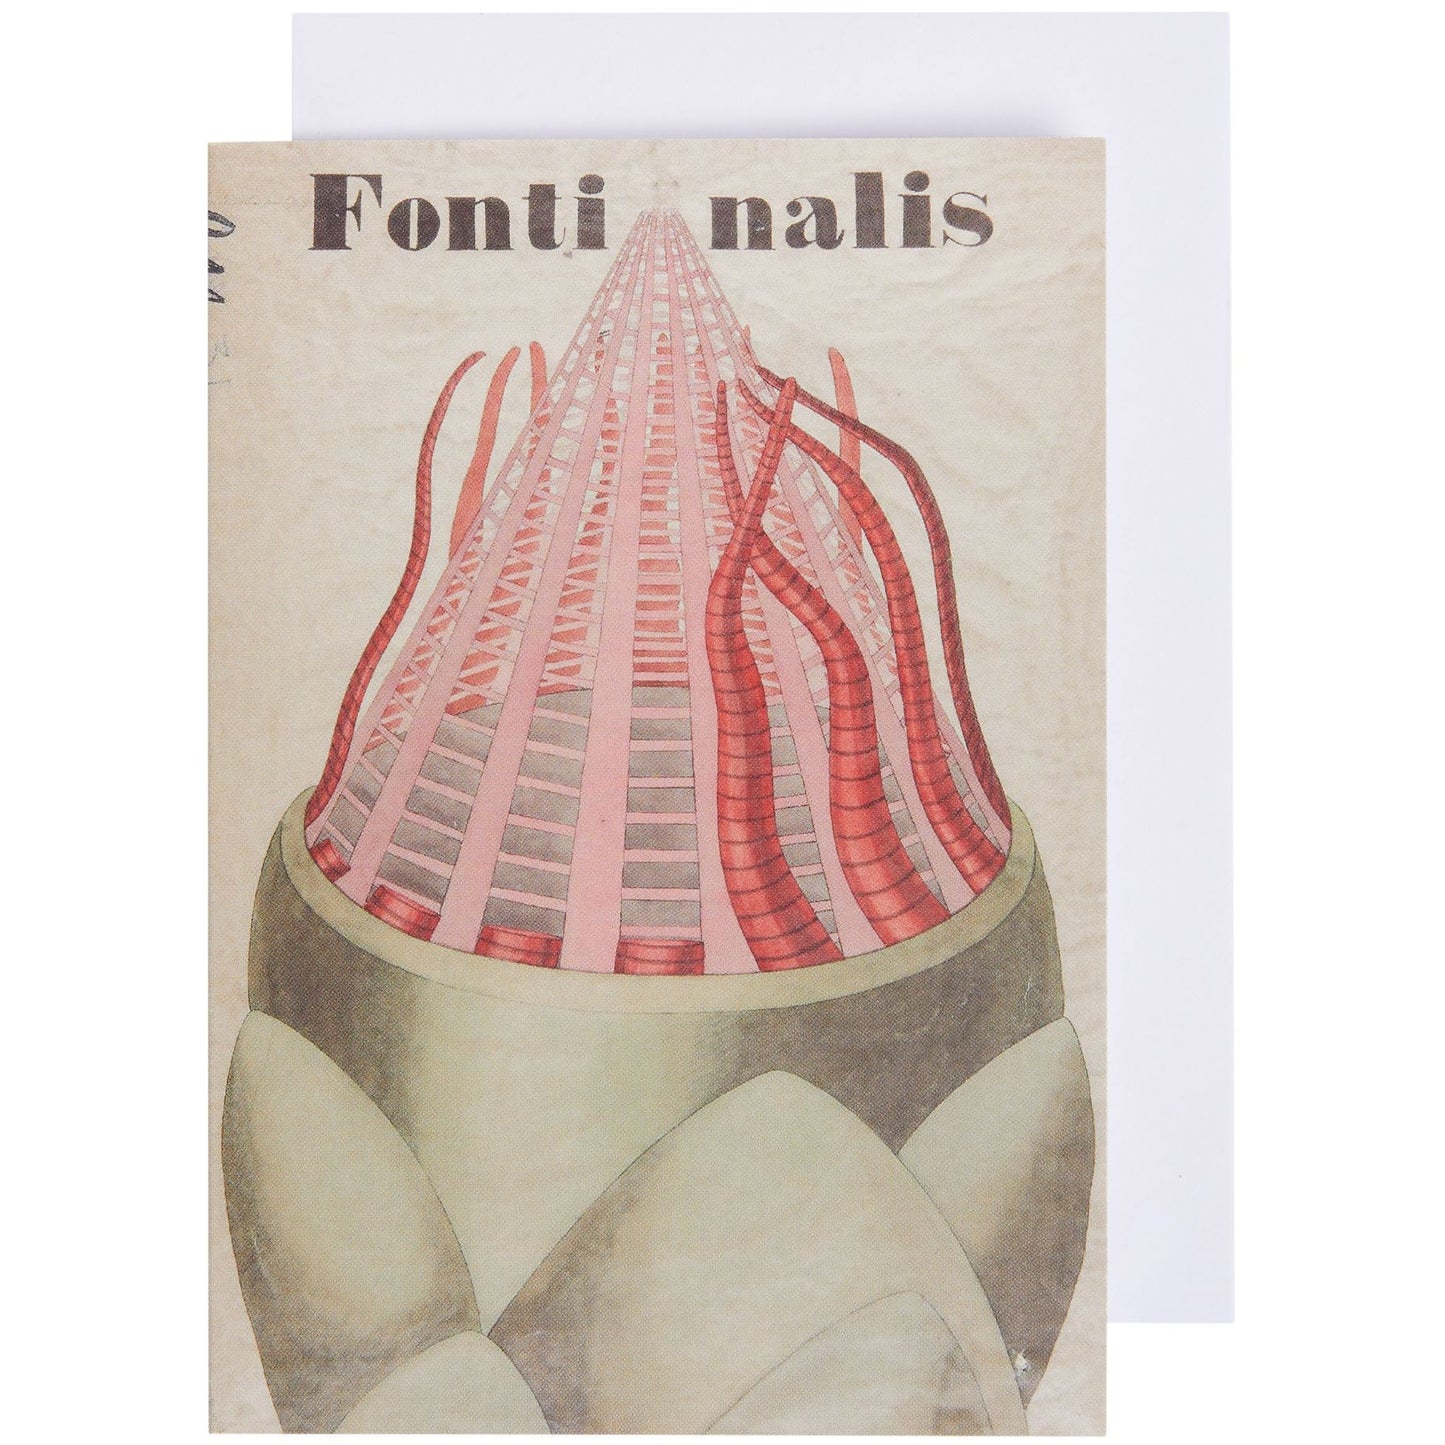 Notecard with envelope, Fontinalis by John Stevens Henslow. From the Whipple Museum of the History of Science, brought to you by CuratingCambridge.com